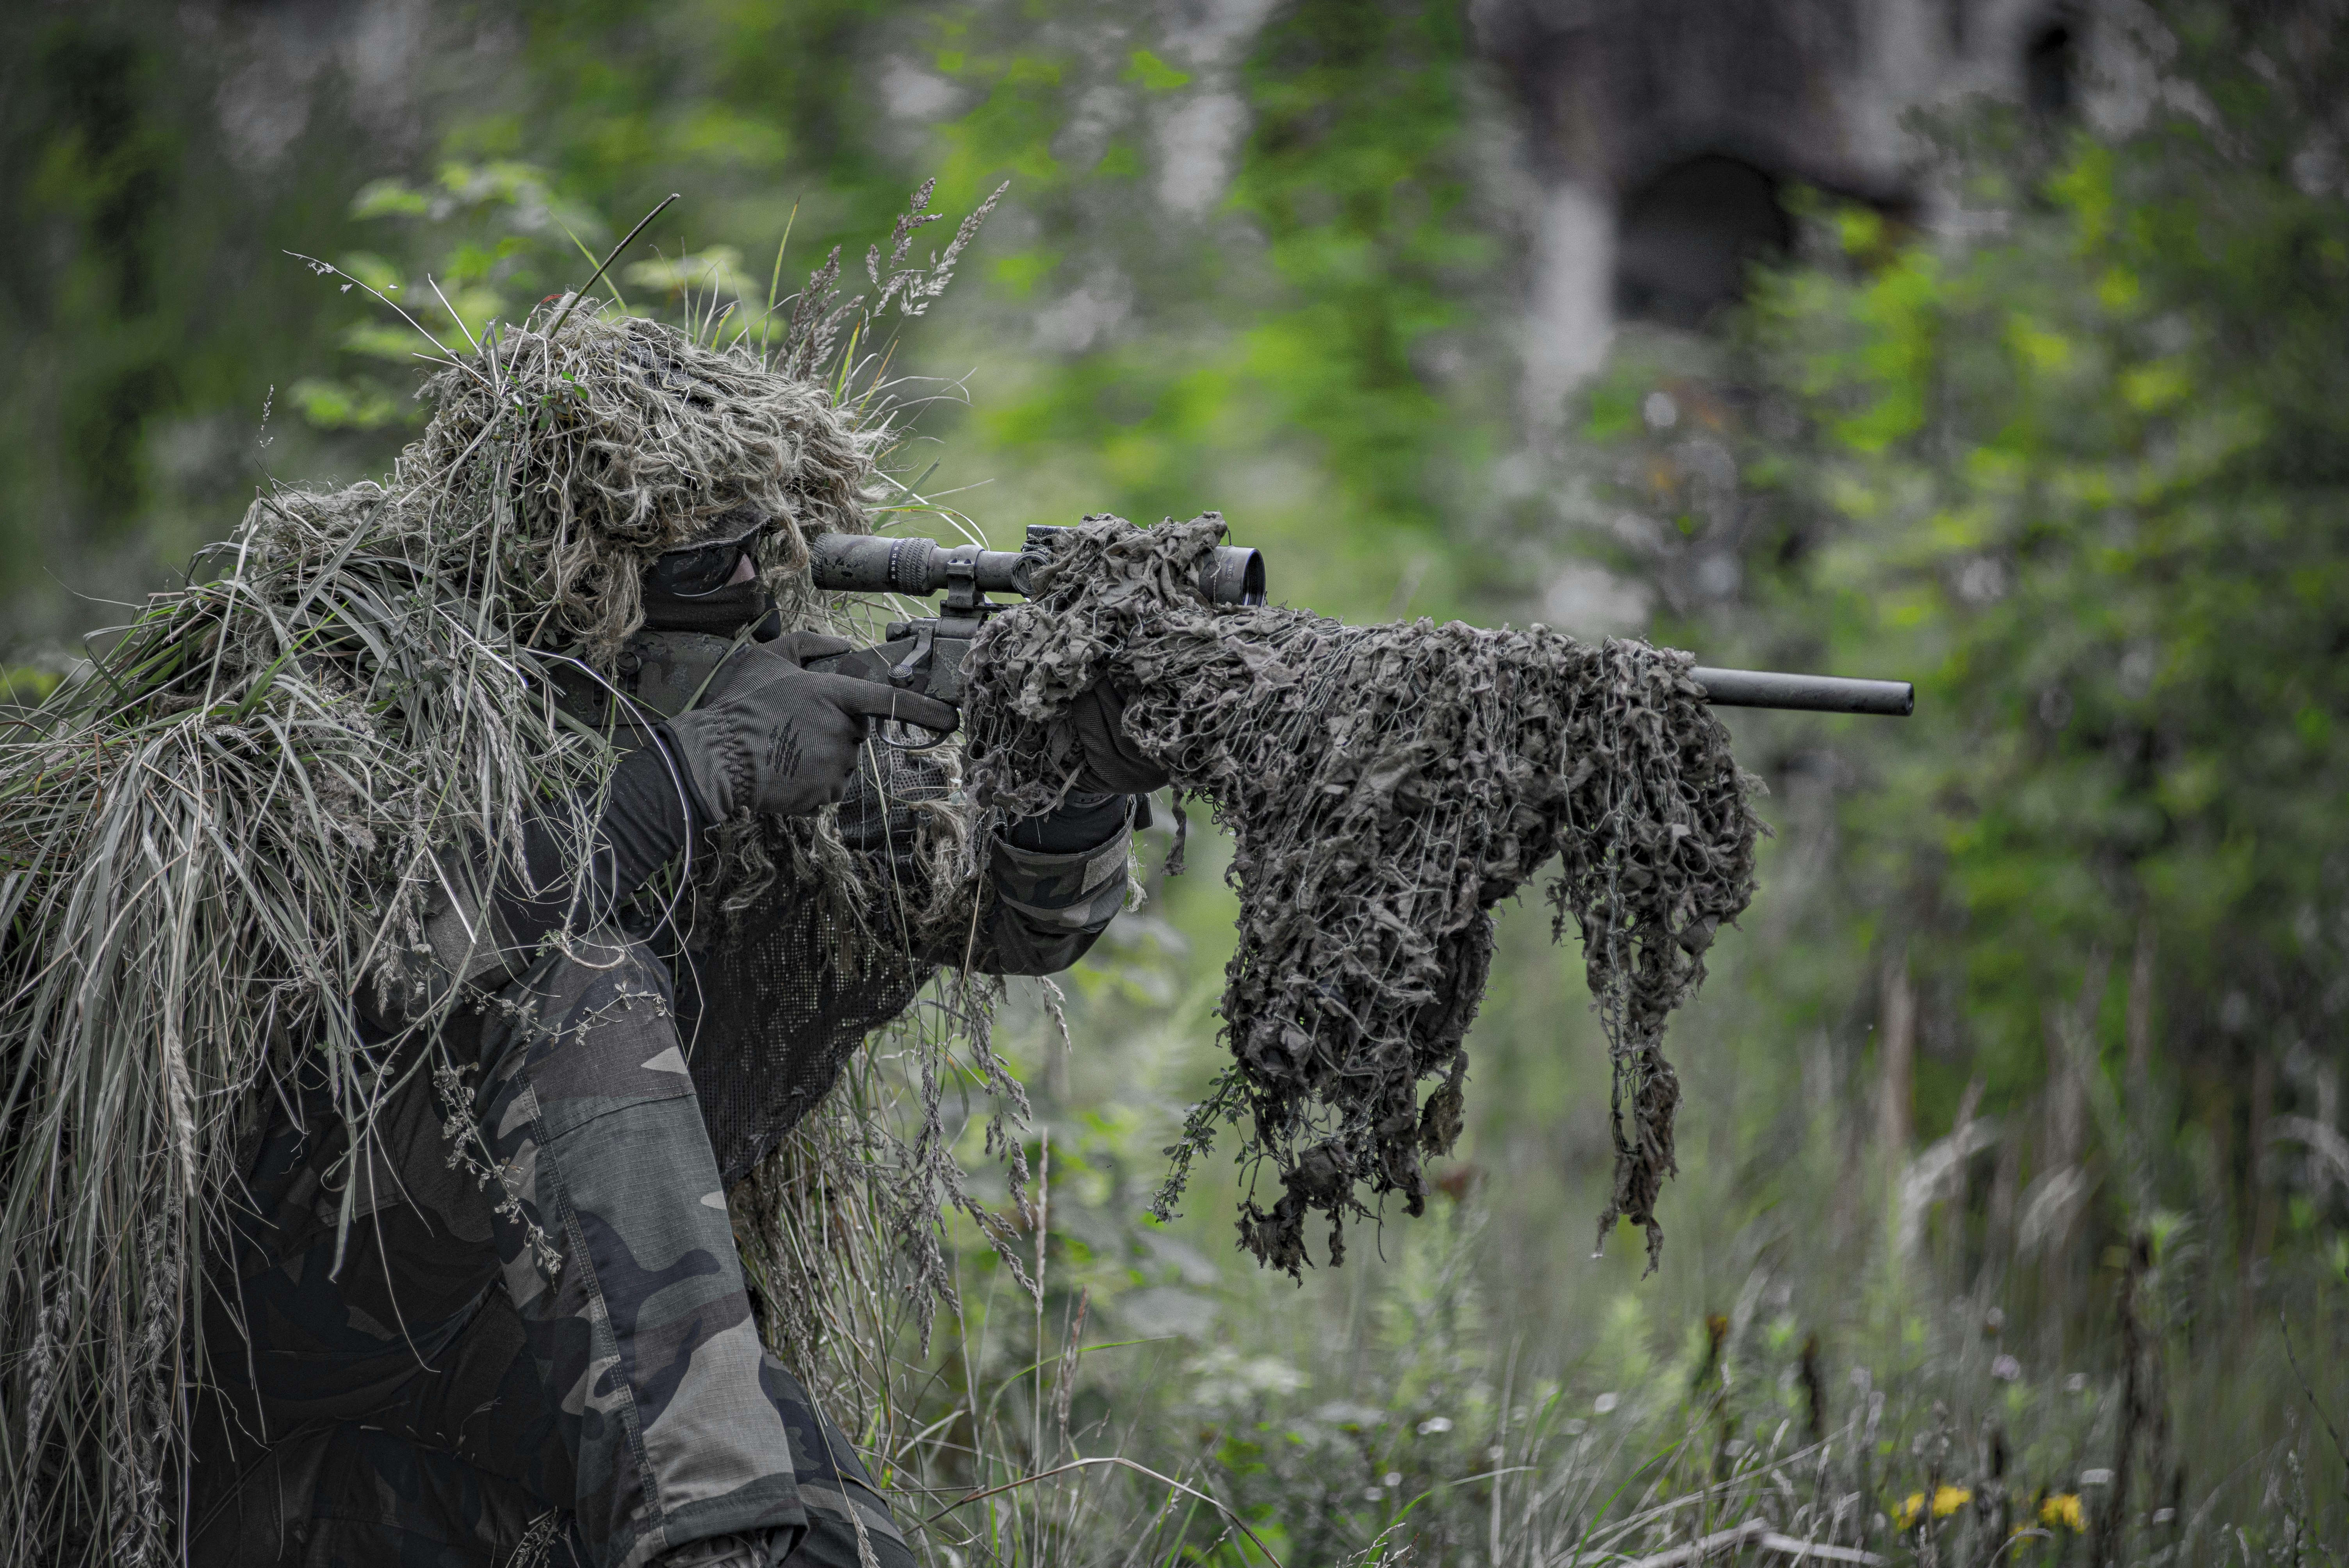 Airsoft sniper, waiting and aiming, player in camouflage